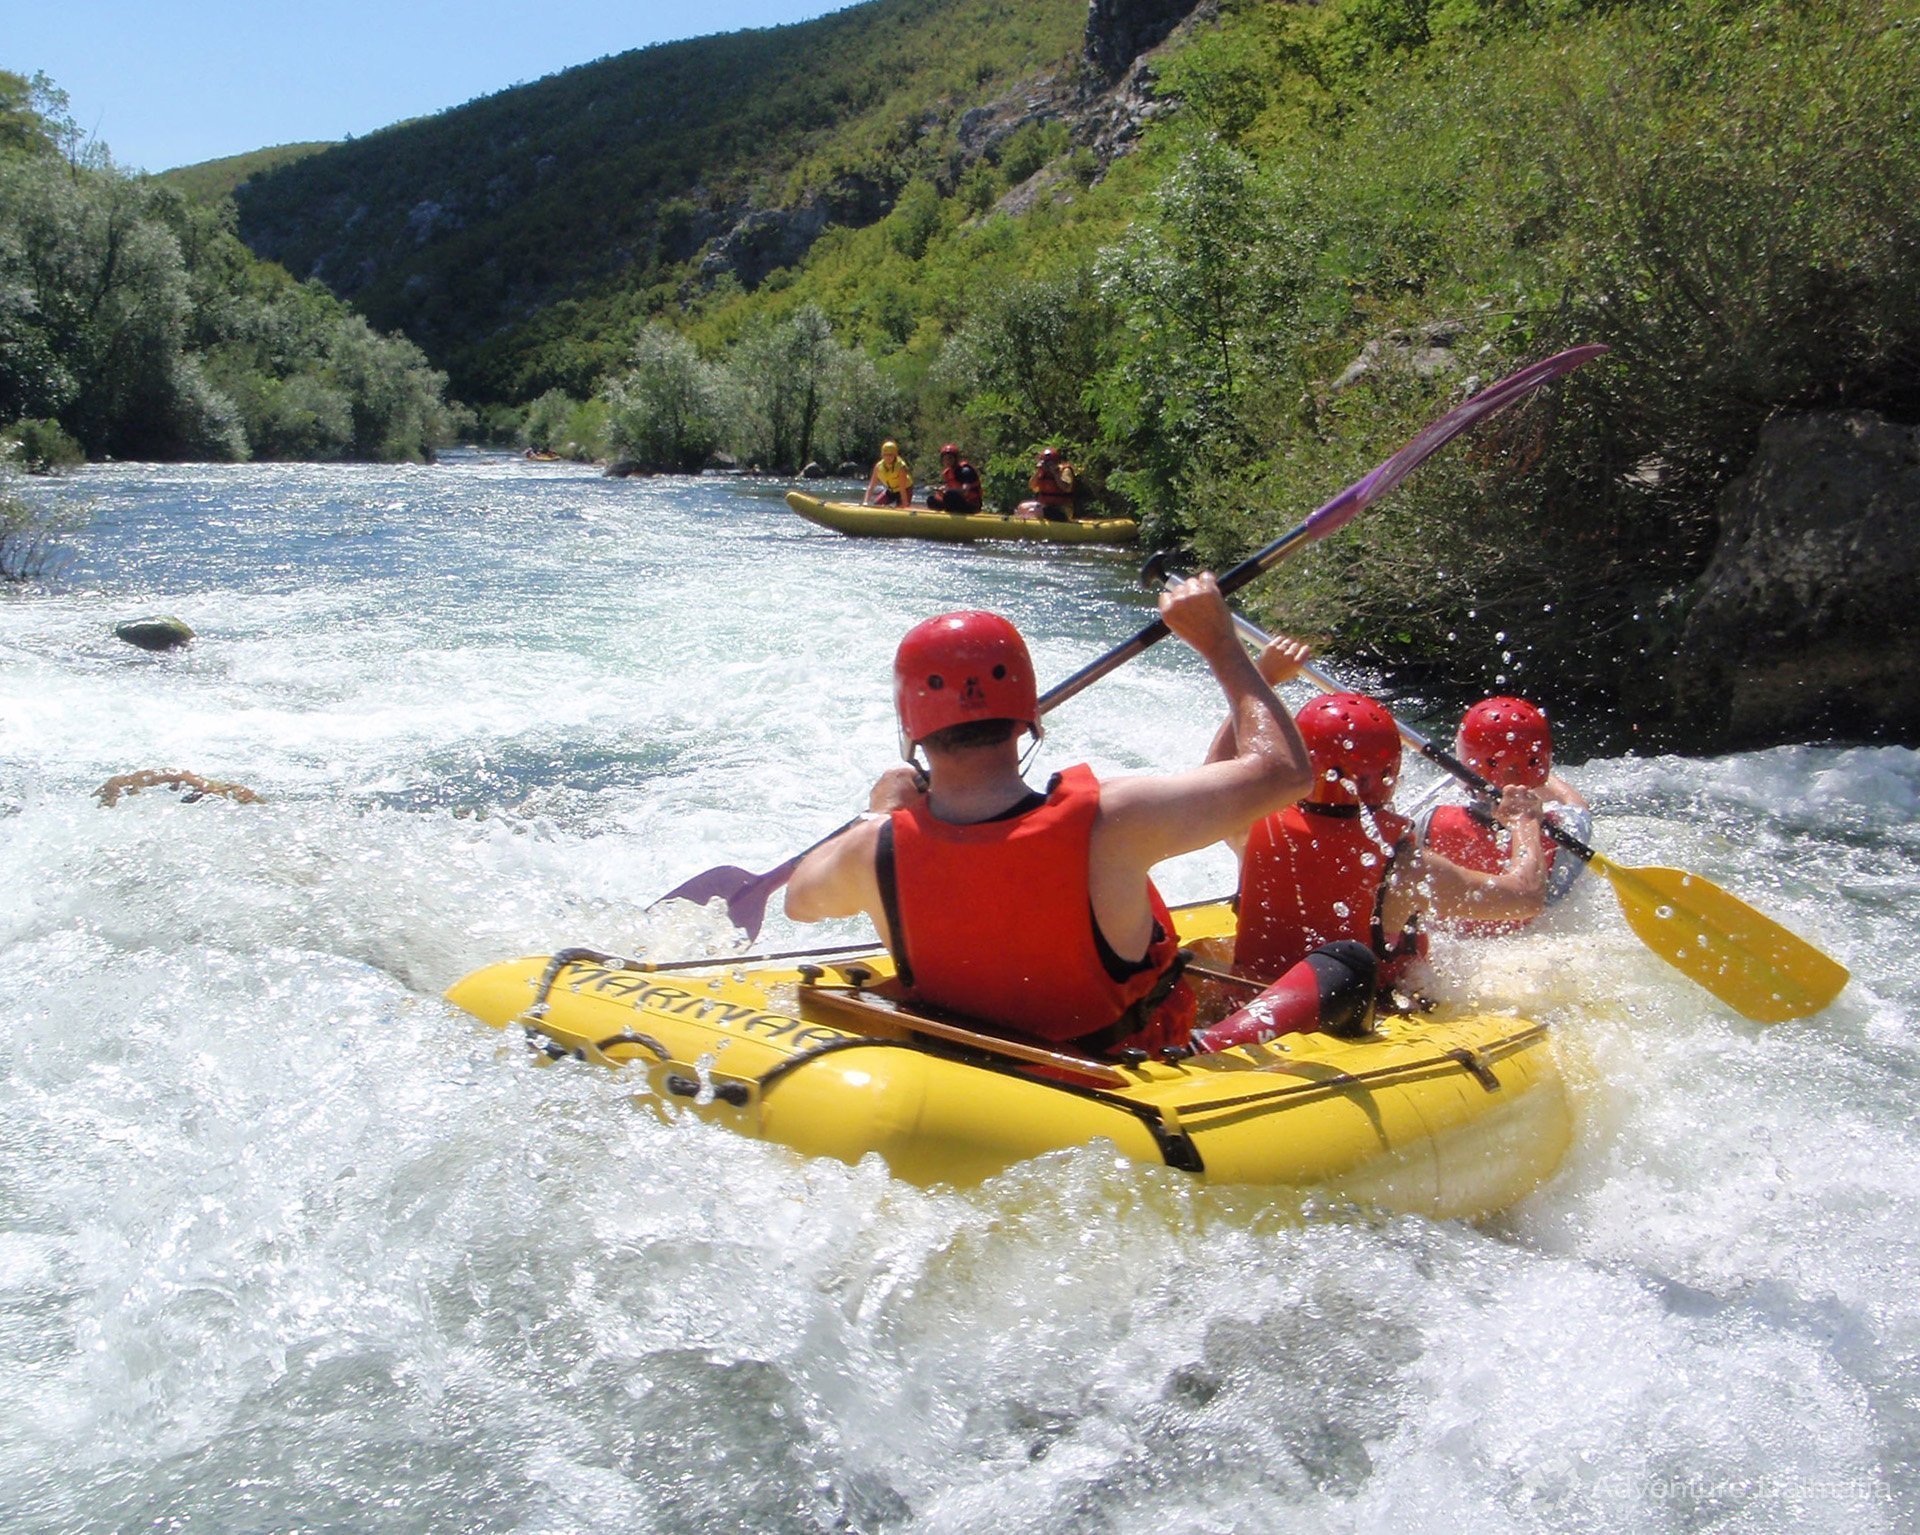 White waters of Cetina river - come and have fun with us on this great excursion